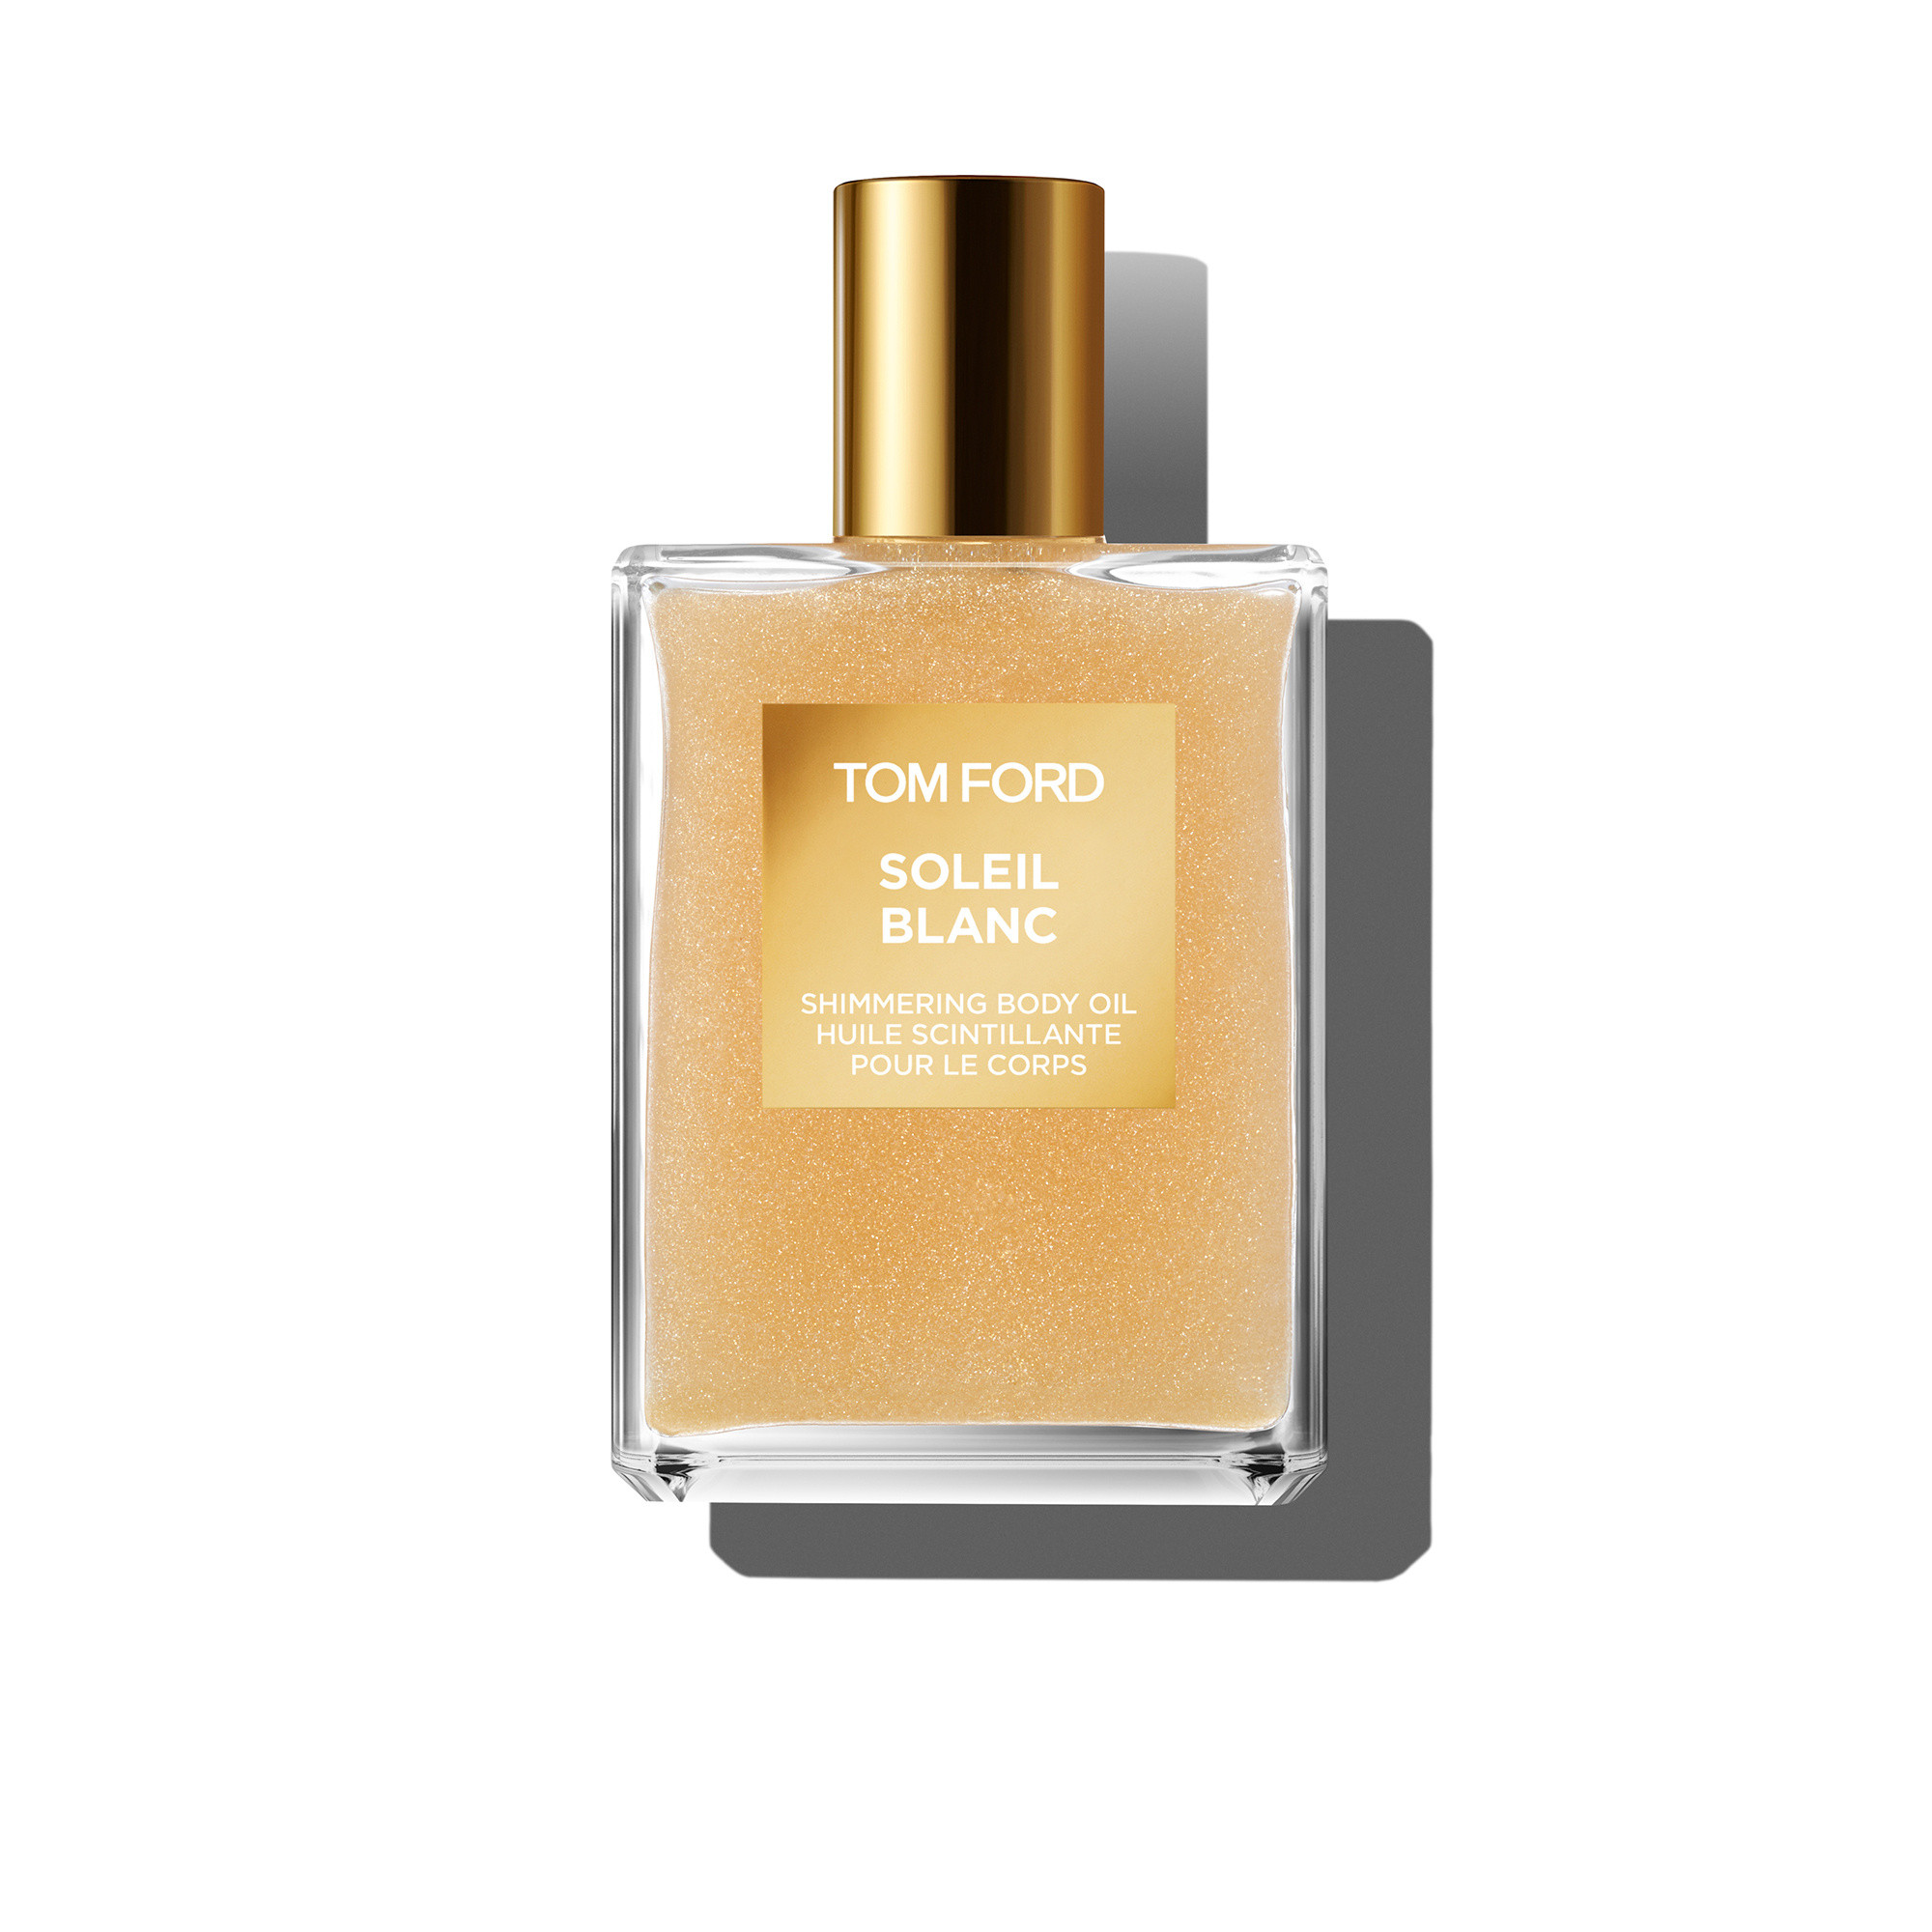 Tom Ford Beauty - Soleil Blanc Shimmering Body Oil 100 ml, Giallo oro, large image number 0